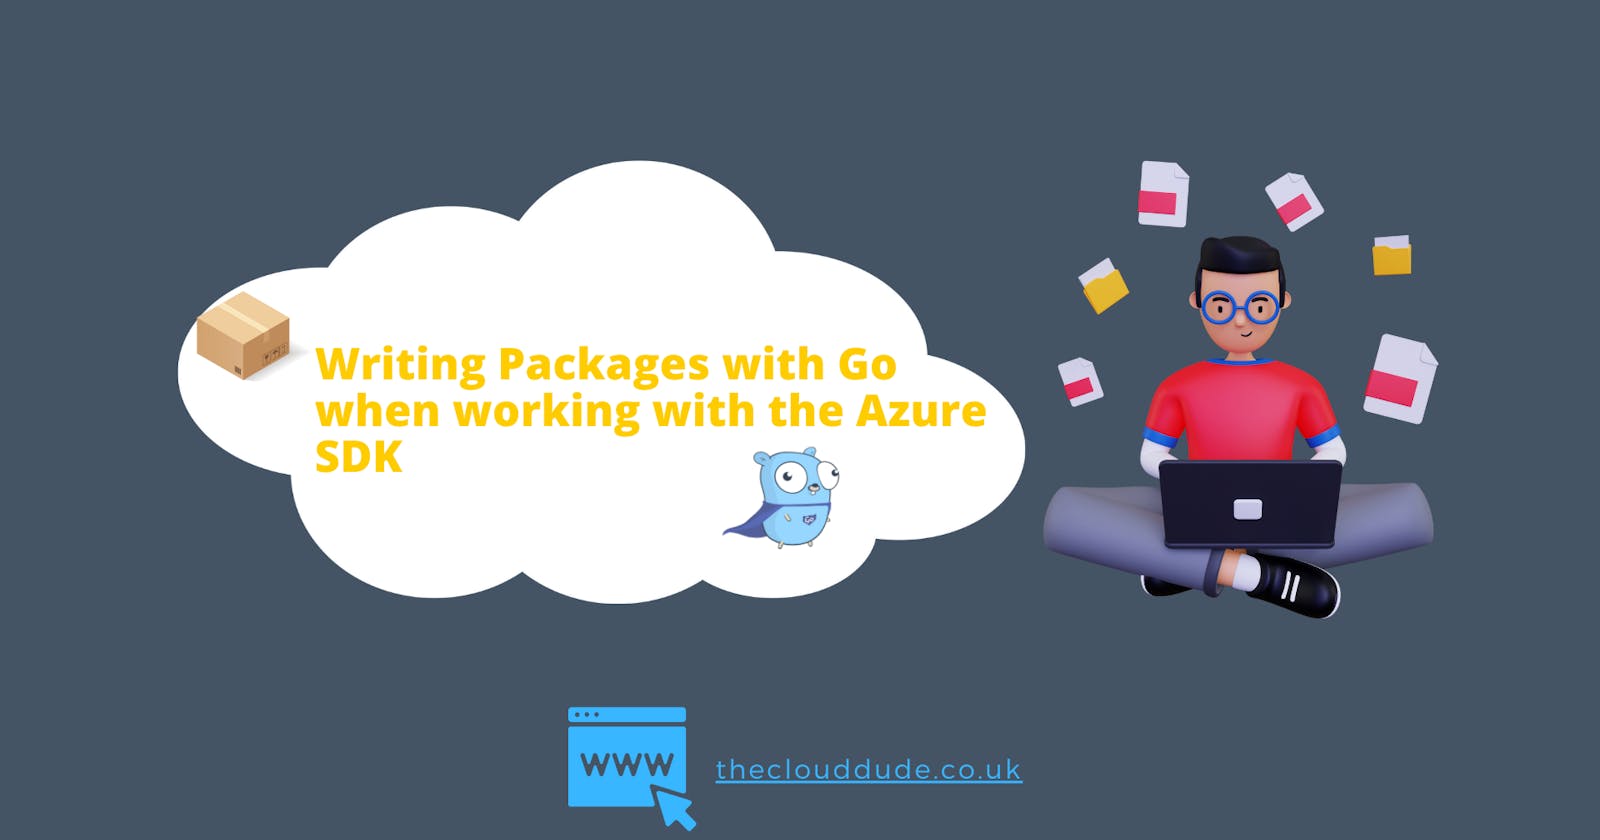 Mastering writing Packages with Go when working with the Azure SDK.